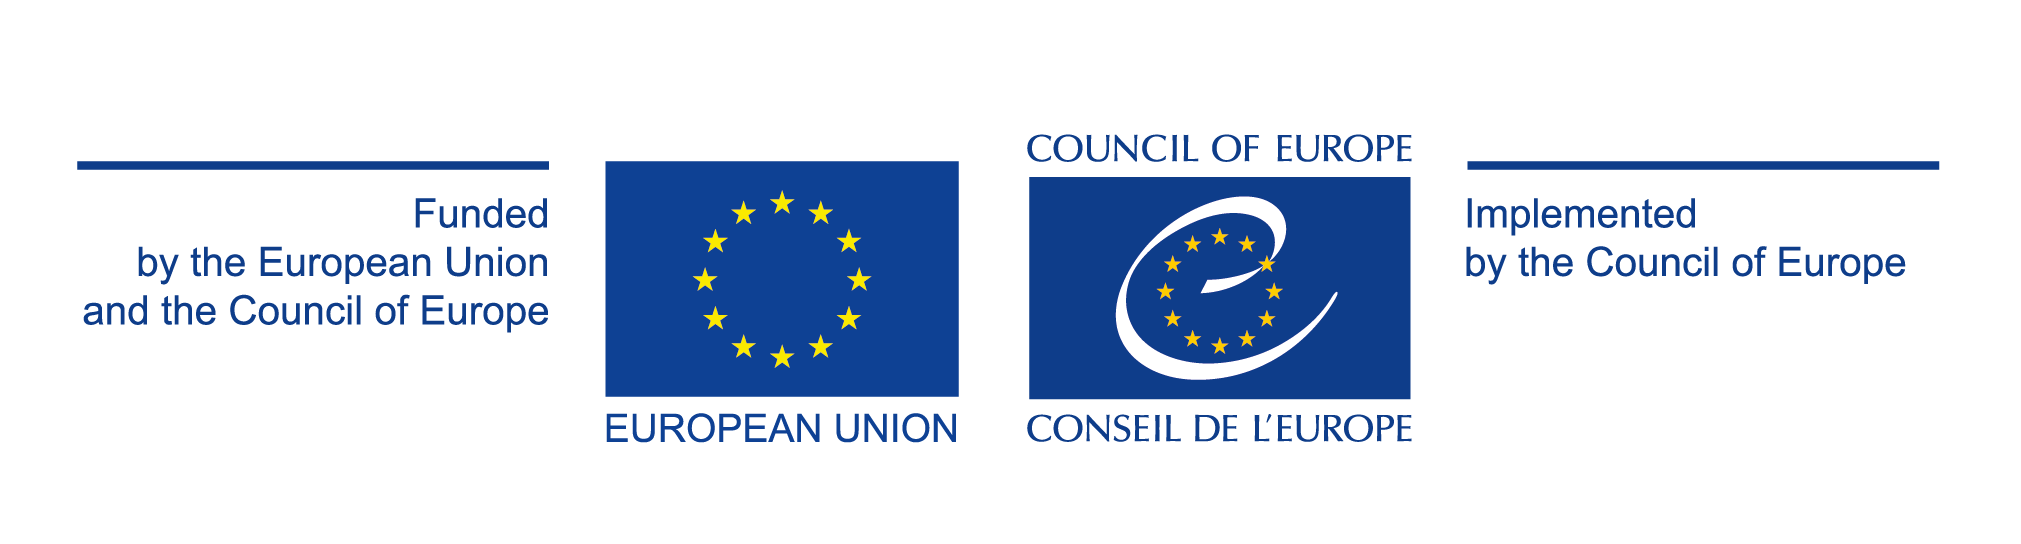 Funded by the EU and the CoE, Implemented by the CoE